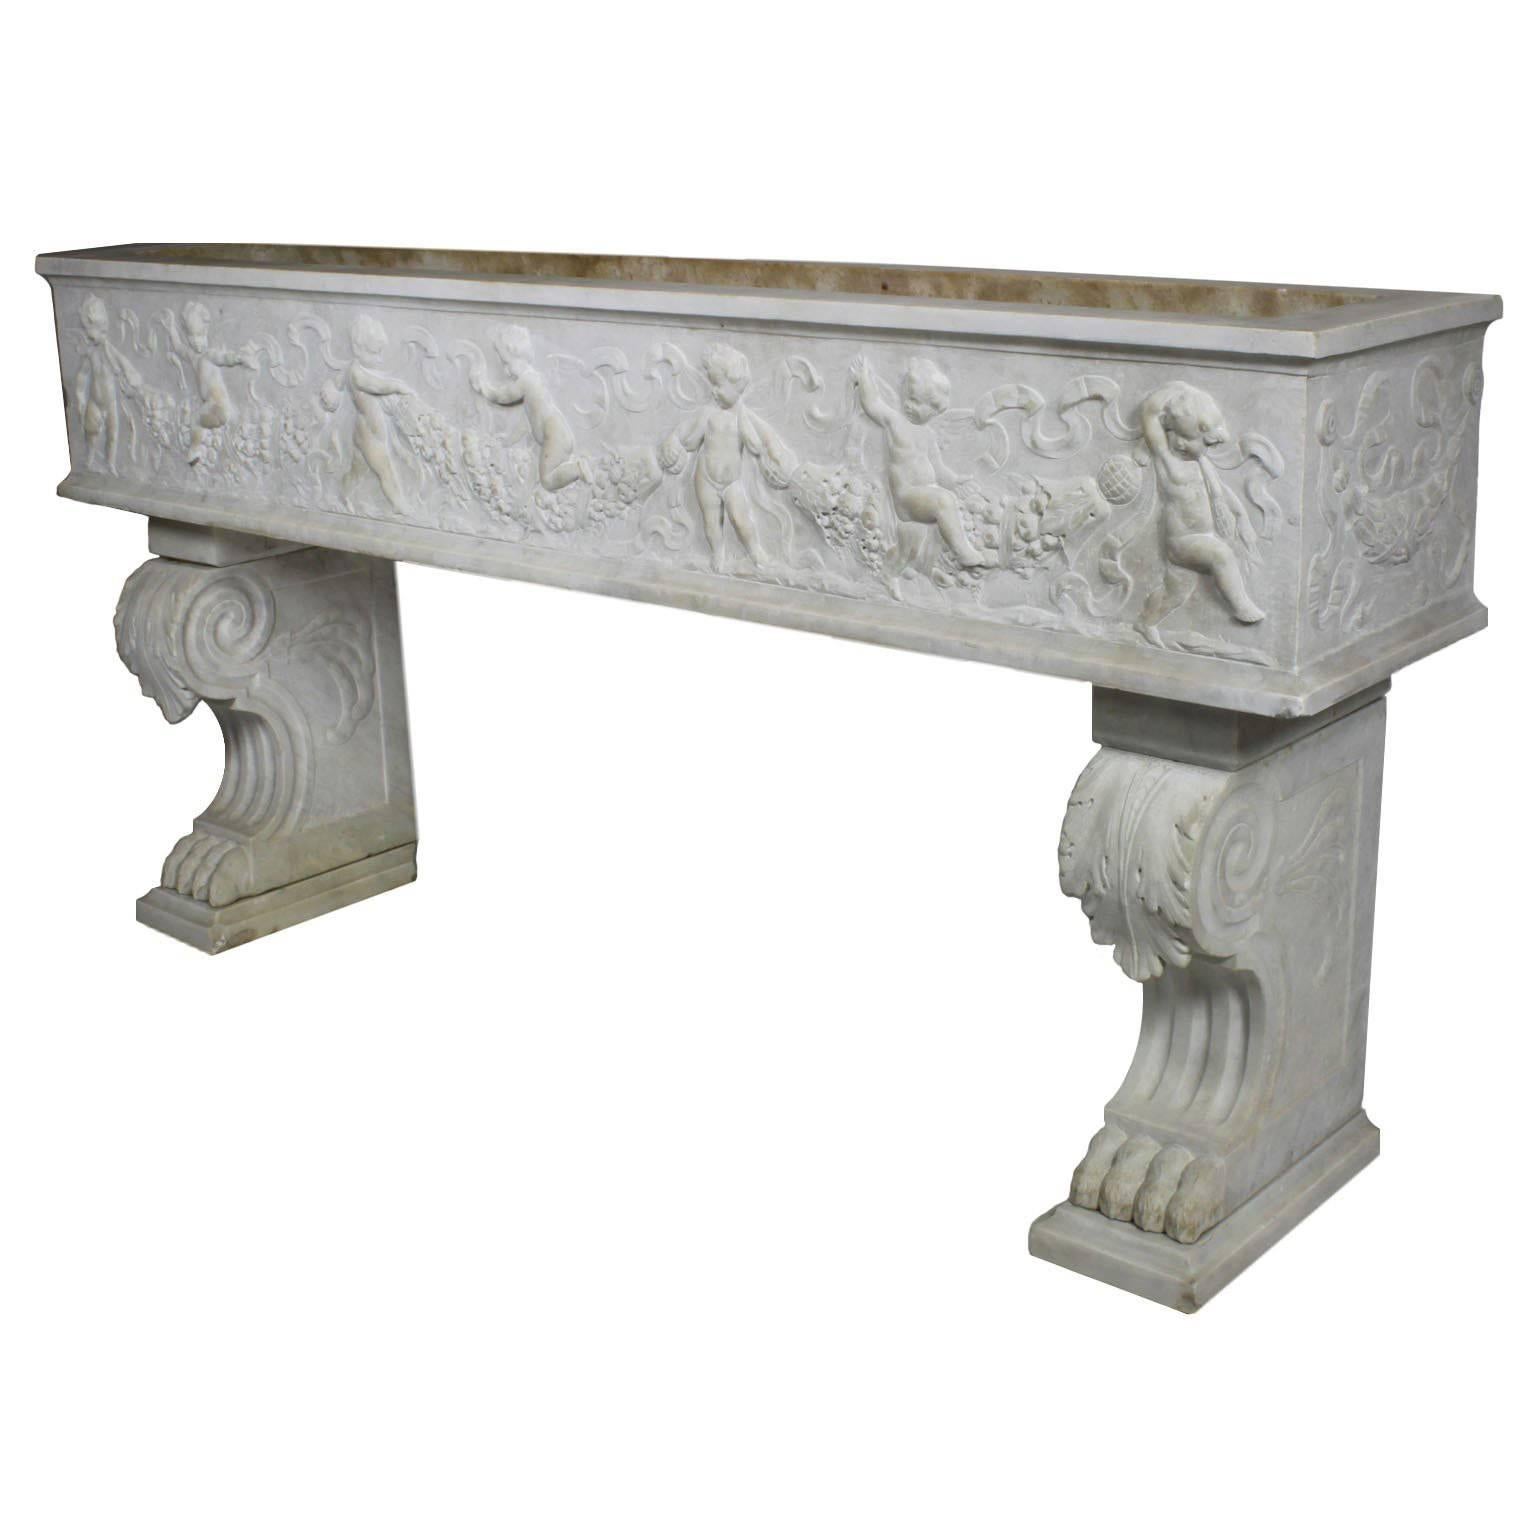 French 19th Century, Whimsical Rococo Style Marble Carved Planter with Cherubs For Sale